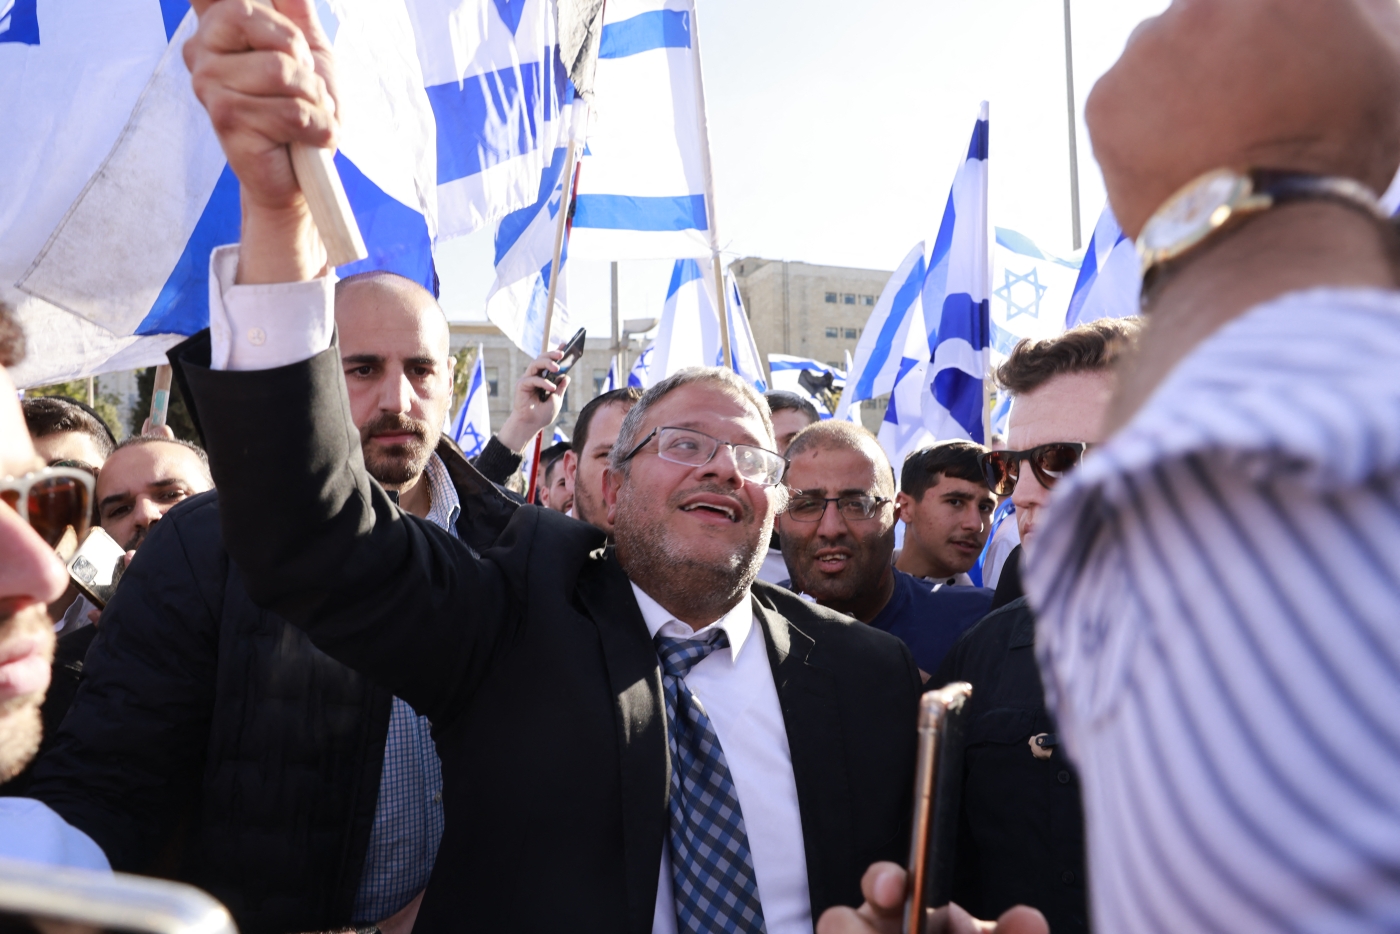 Israeli far-right lawmaker and leader of the Jewish Power party Itamar Ben-Gvir, raises an Israeli flag in Safra square in Jerusalem on 20 April 2022 (AFP)